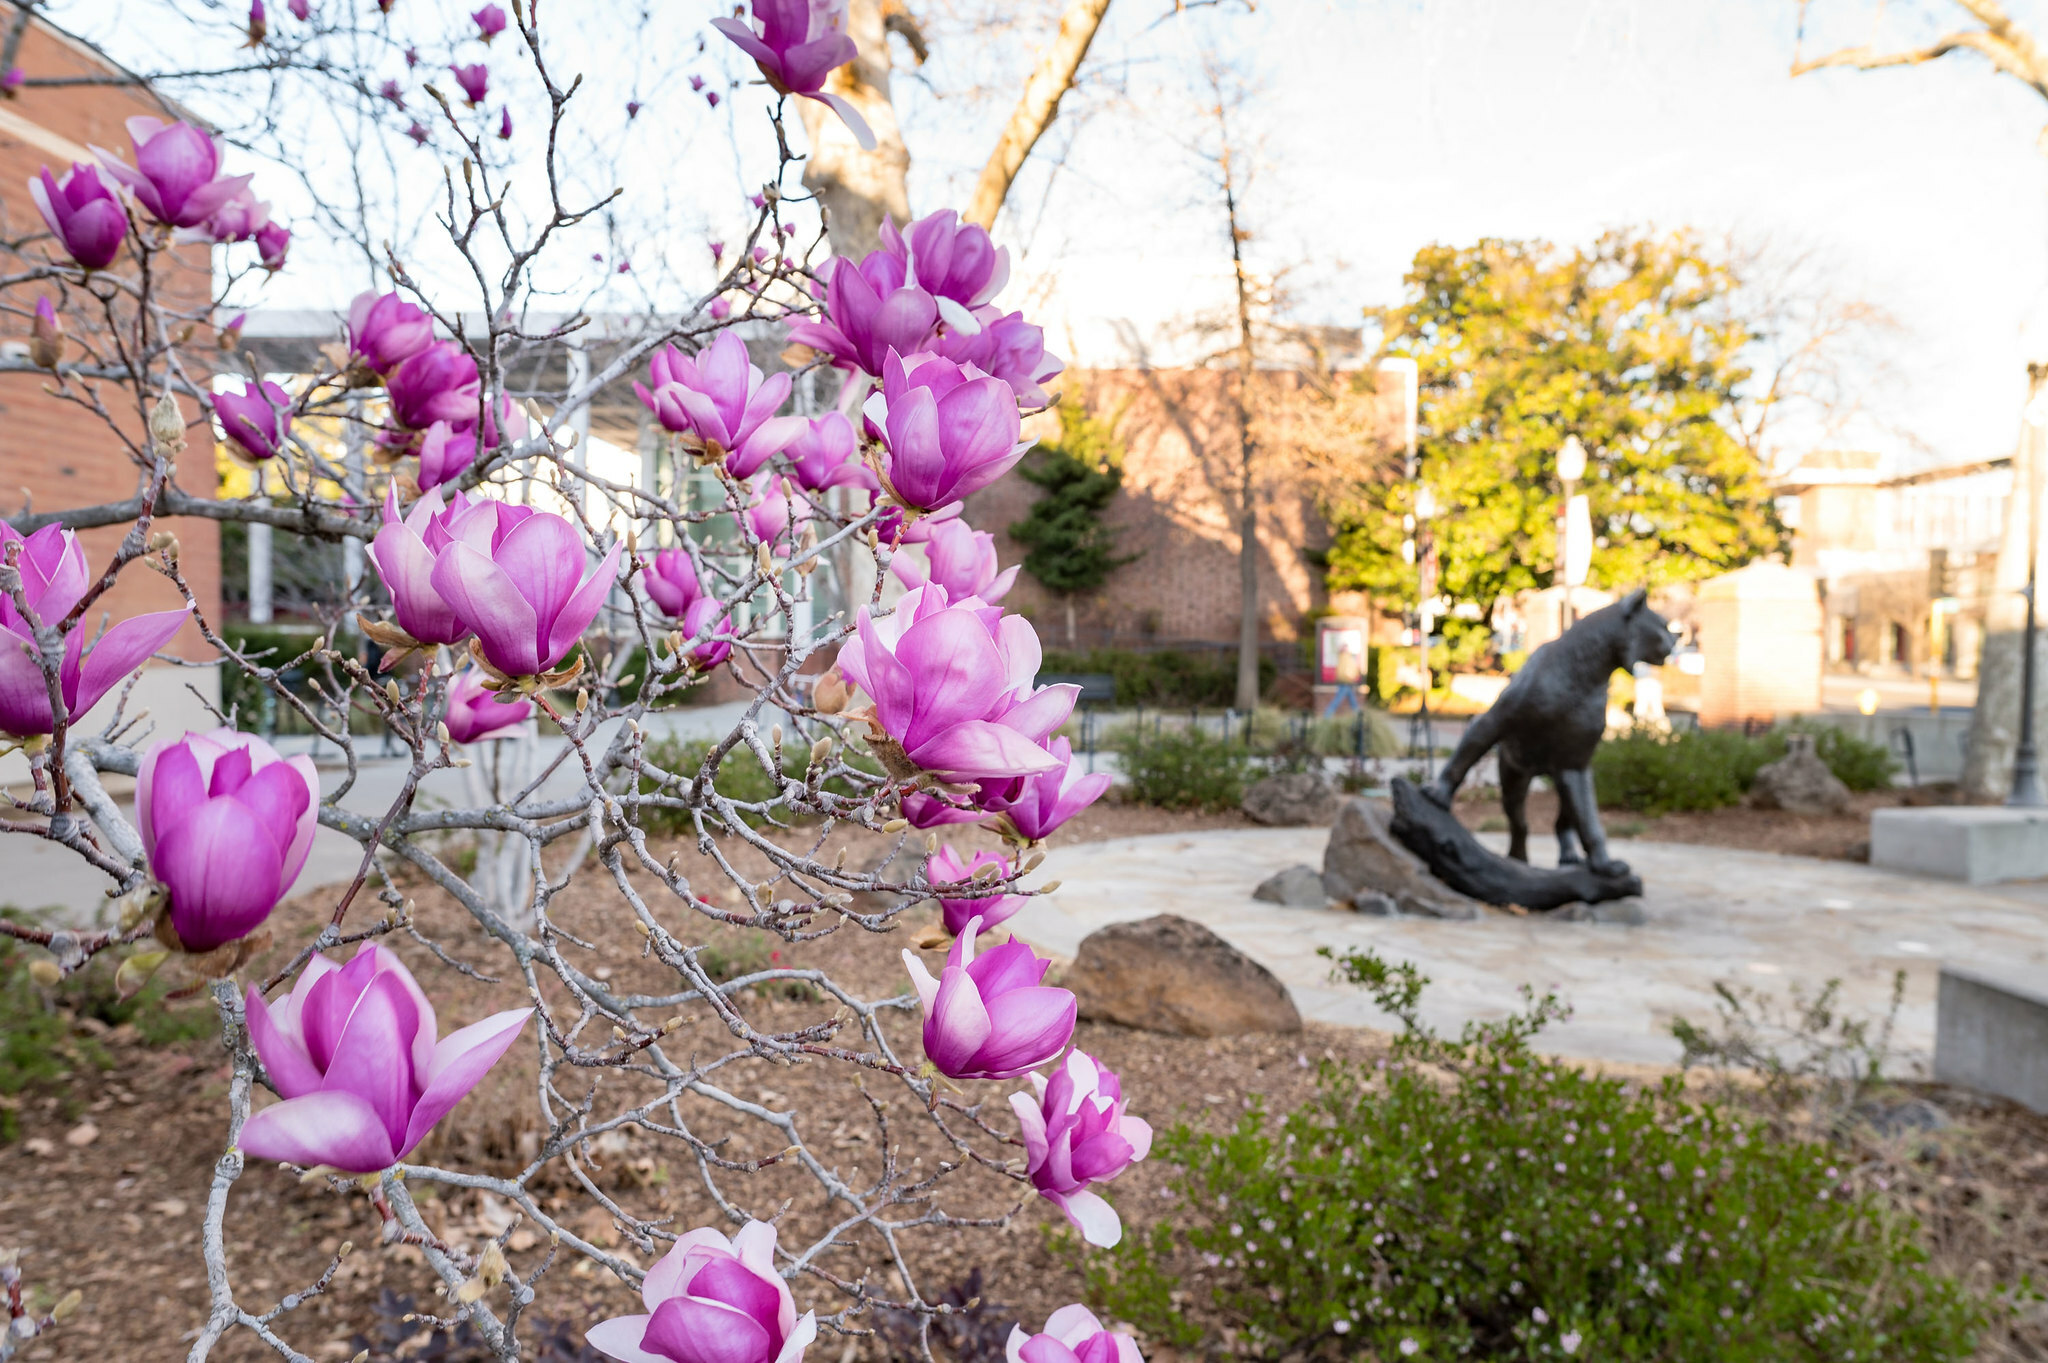 Blossoms with wildcat statue in background